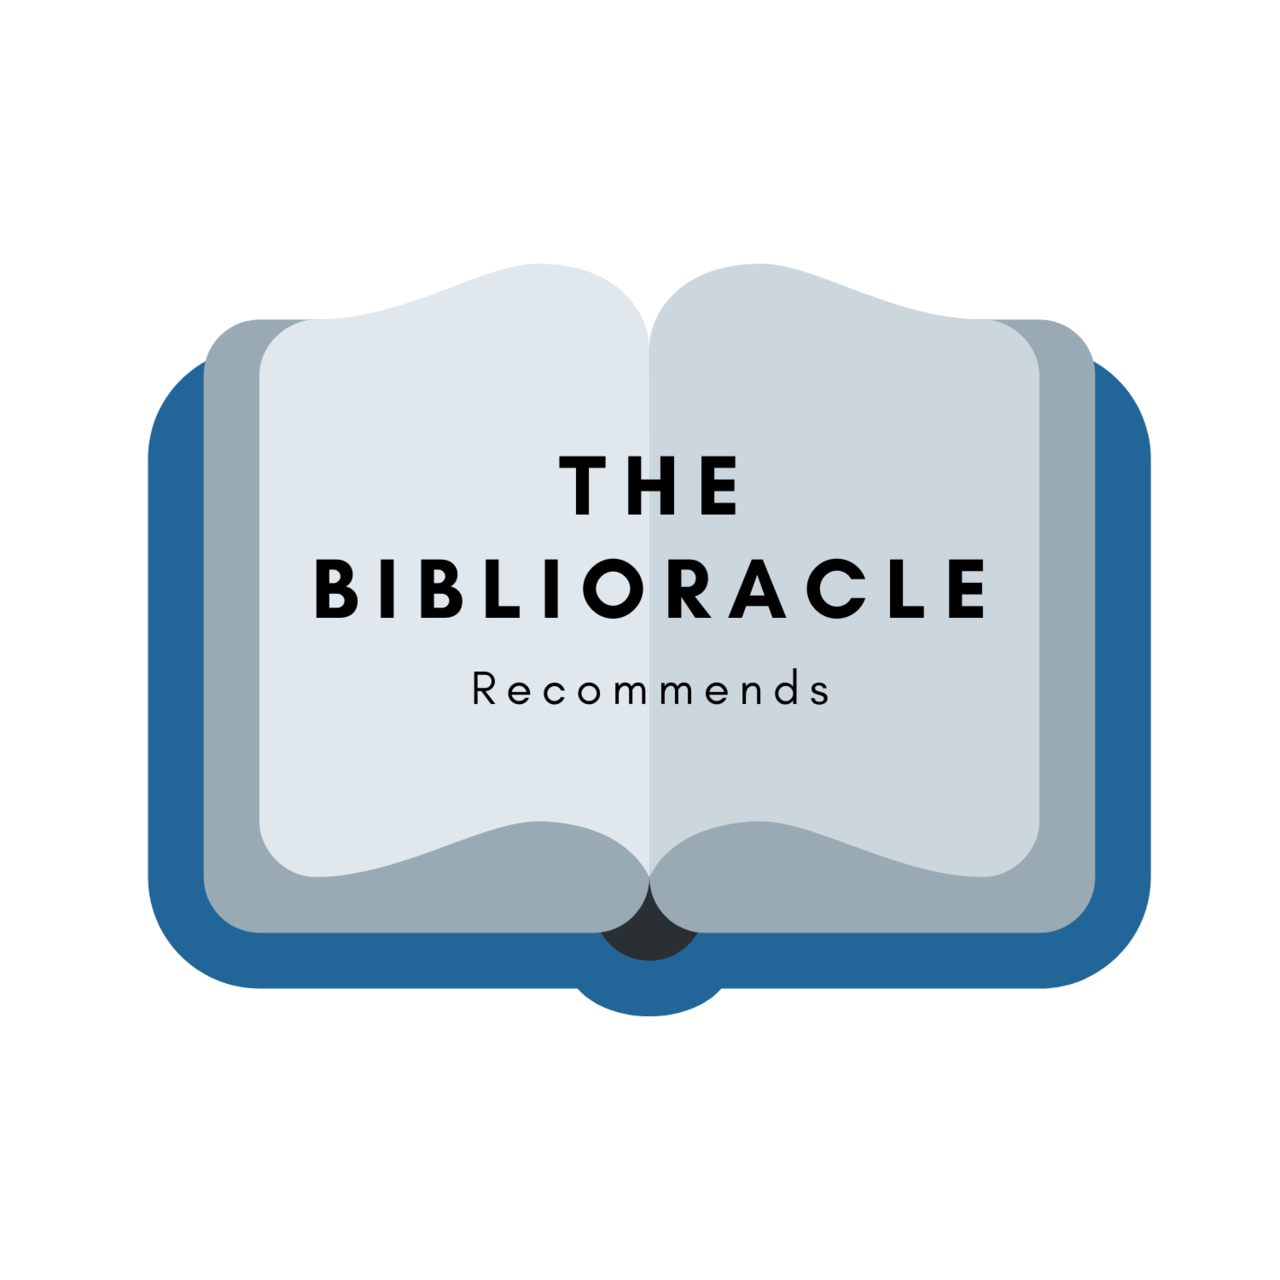 Artwork for The Biblioracle Recommends